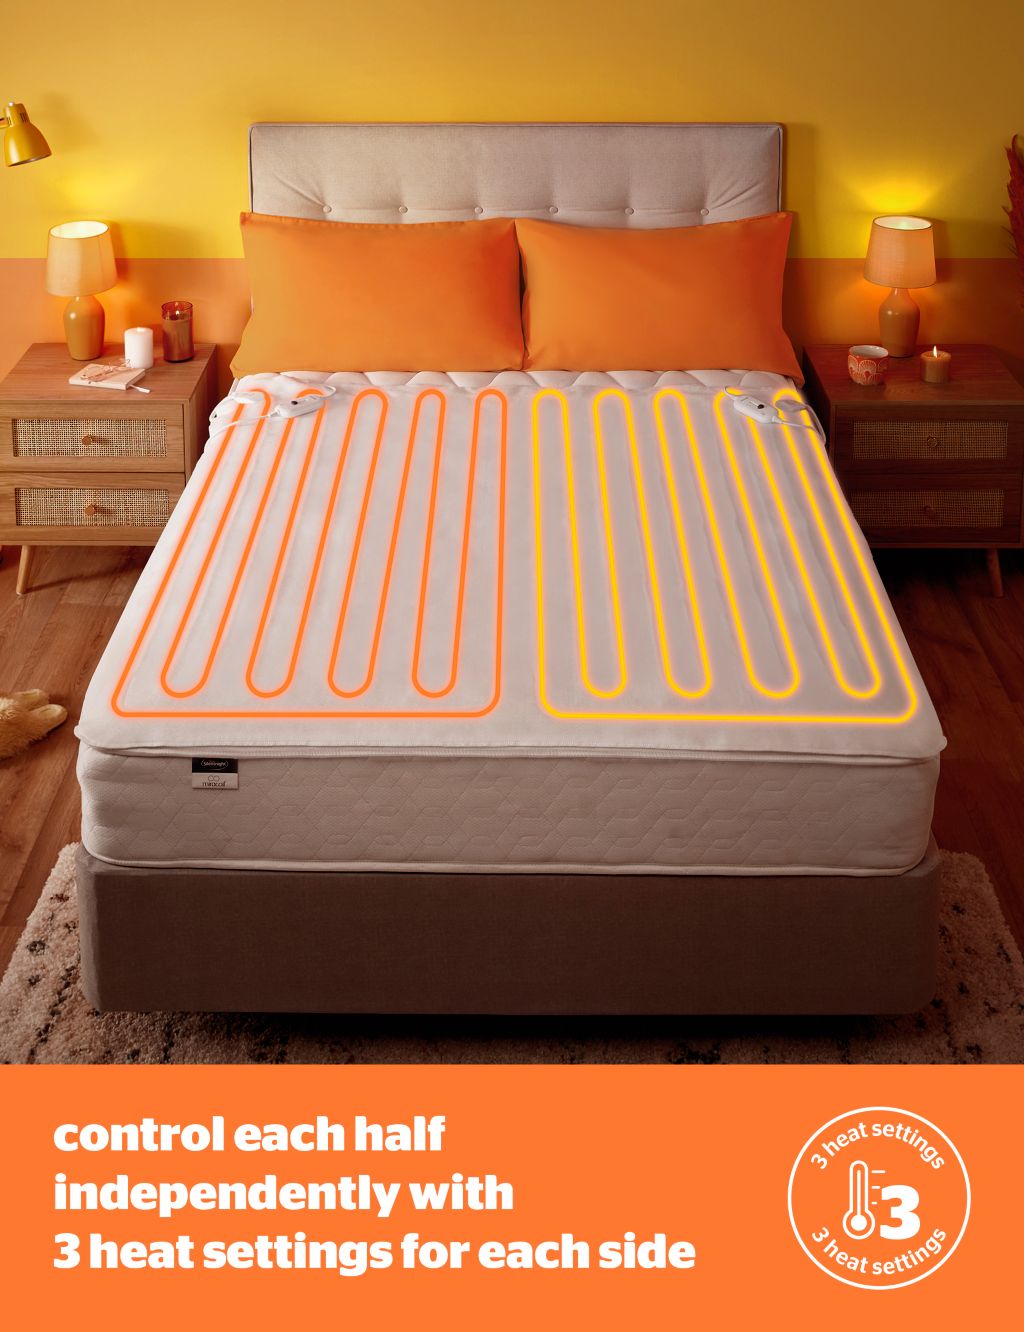 Yours & Mine Dual Control Electric Blanket image 3